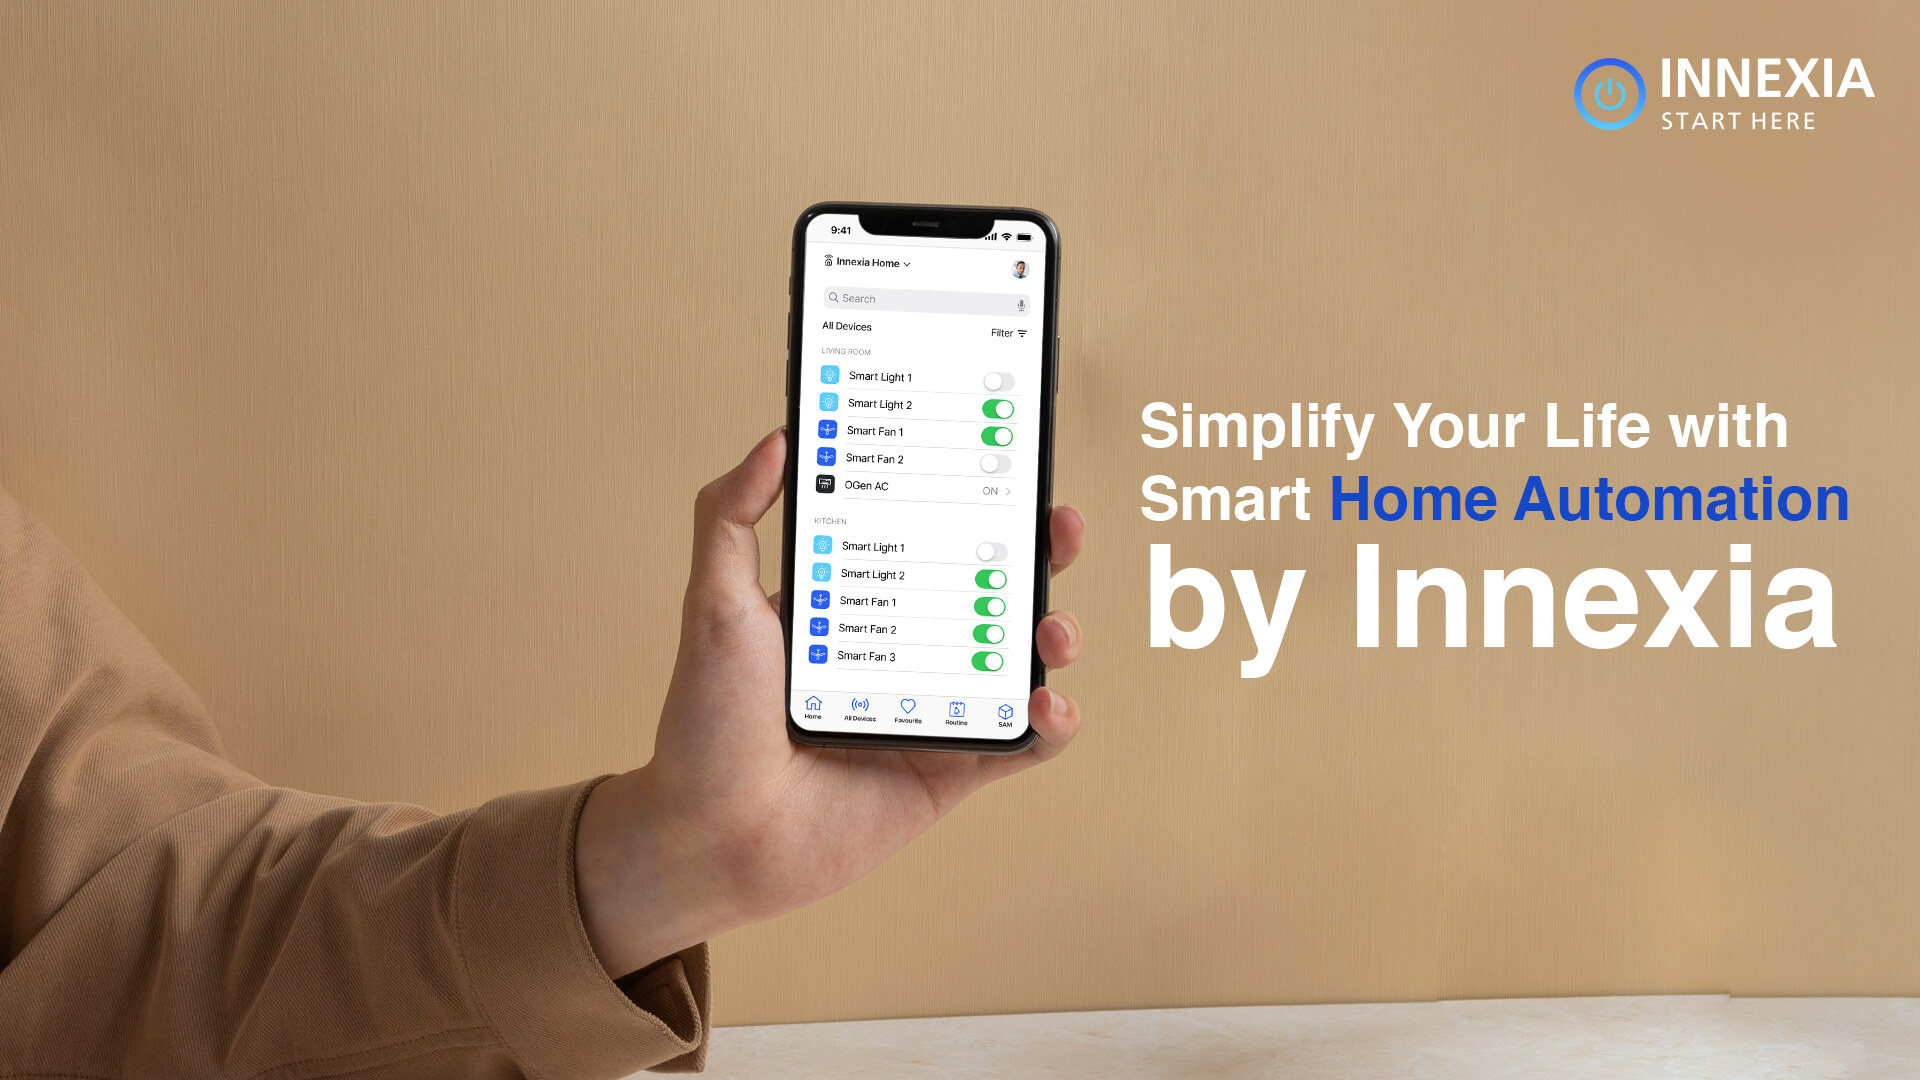 Simplify Your Life with Smart Home Automation by Innexia